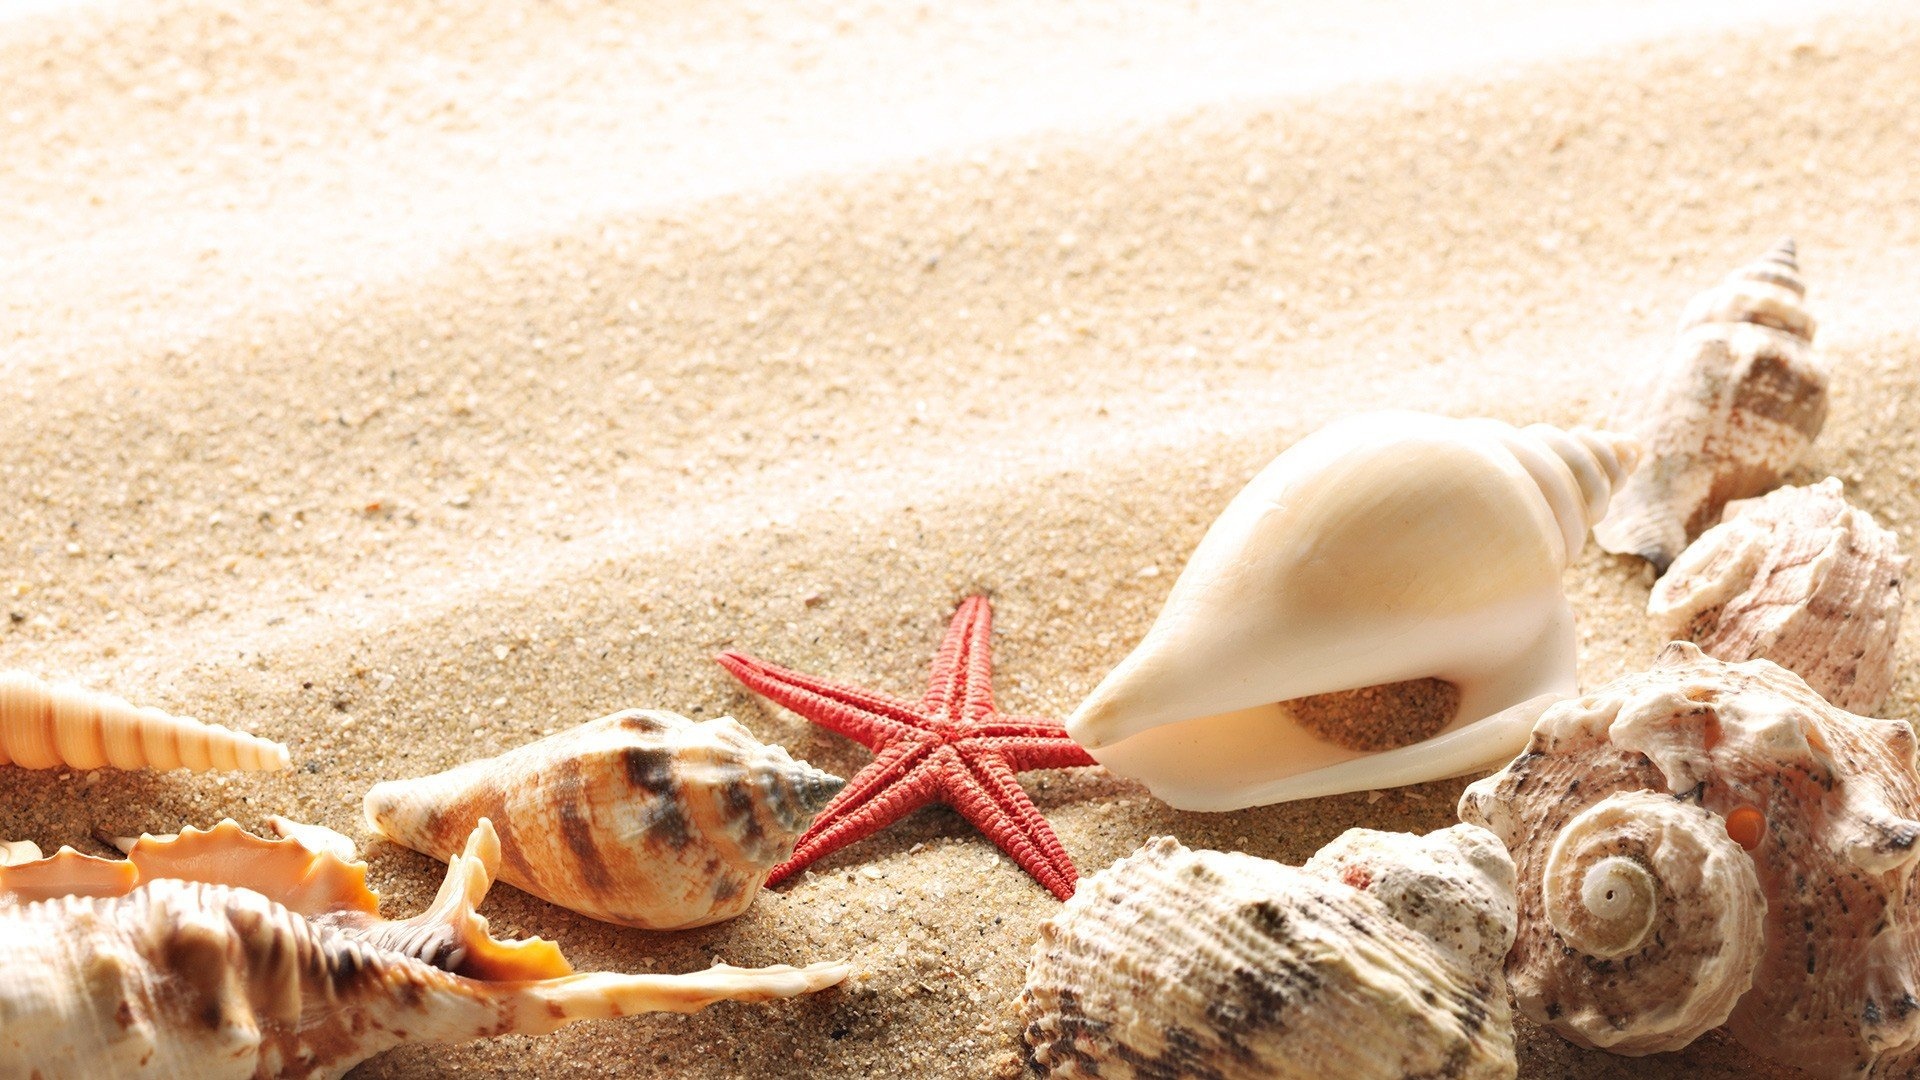 Sea Shell: Grows continuously throughout the creatures' life living in them. 1920x1080 Full HD Wallpaper.